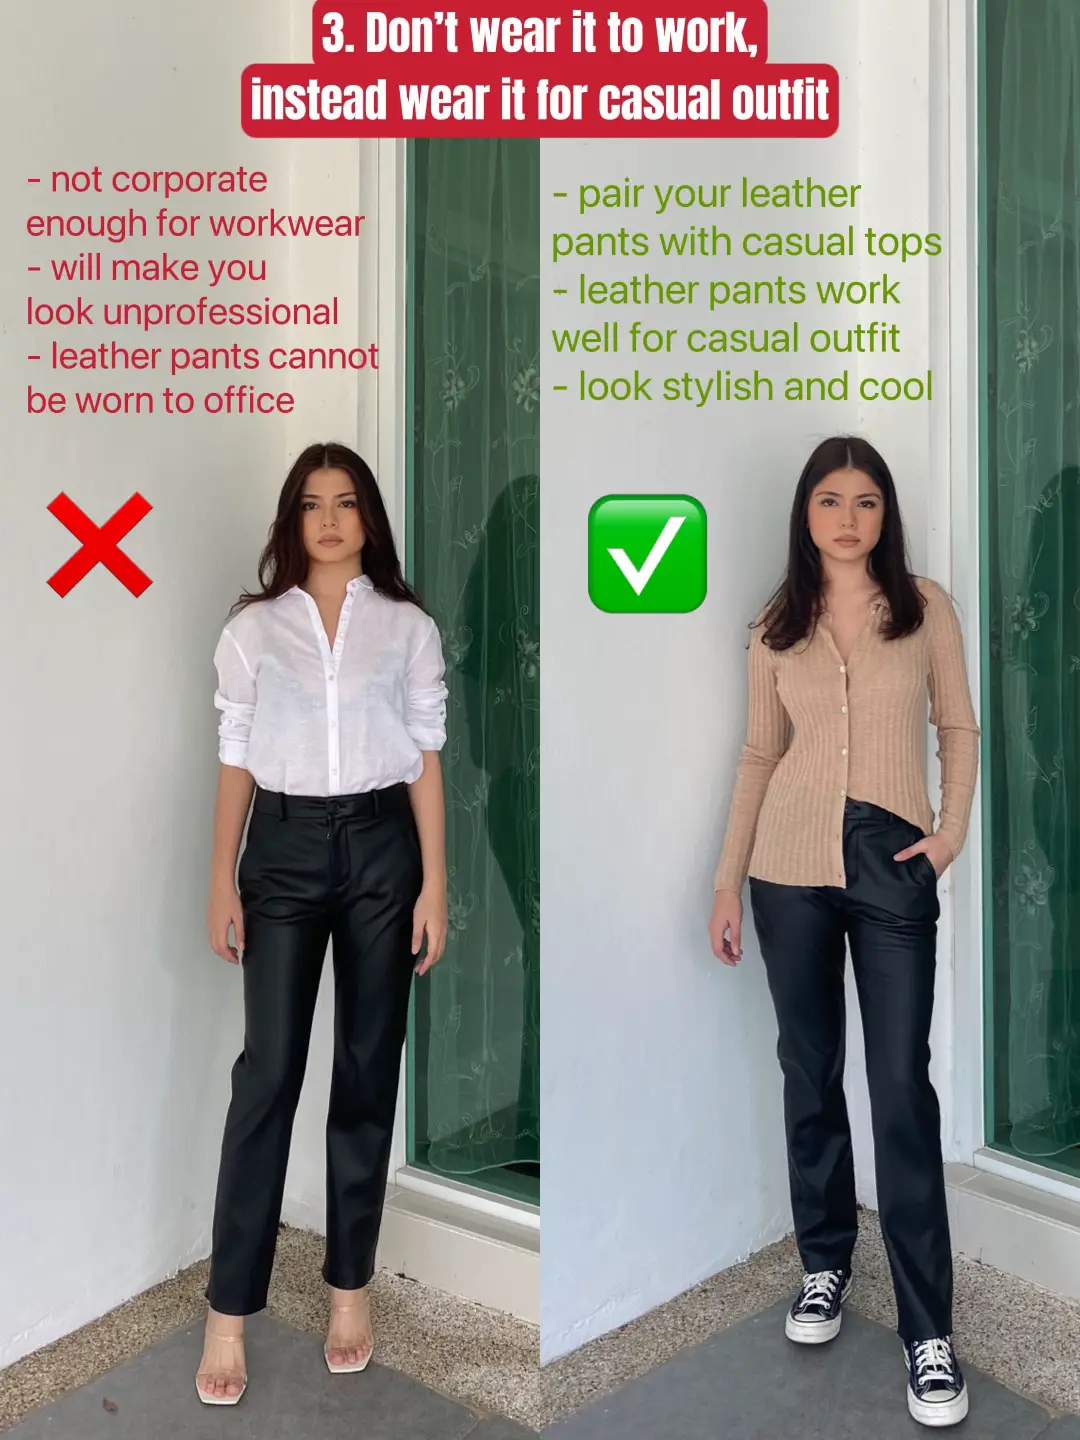 THE RIGHT WAY TO WEAR LEATHER PANTS